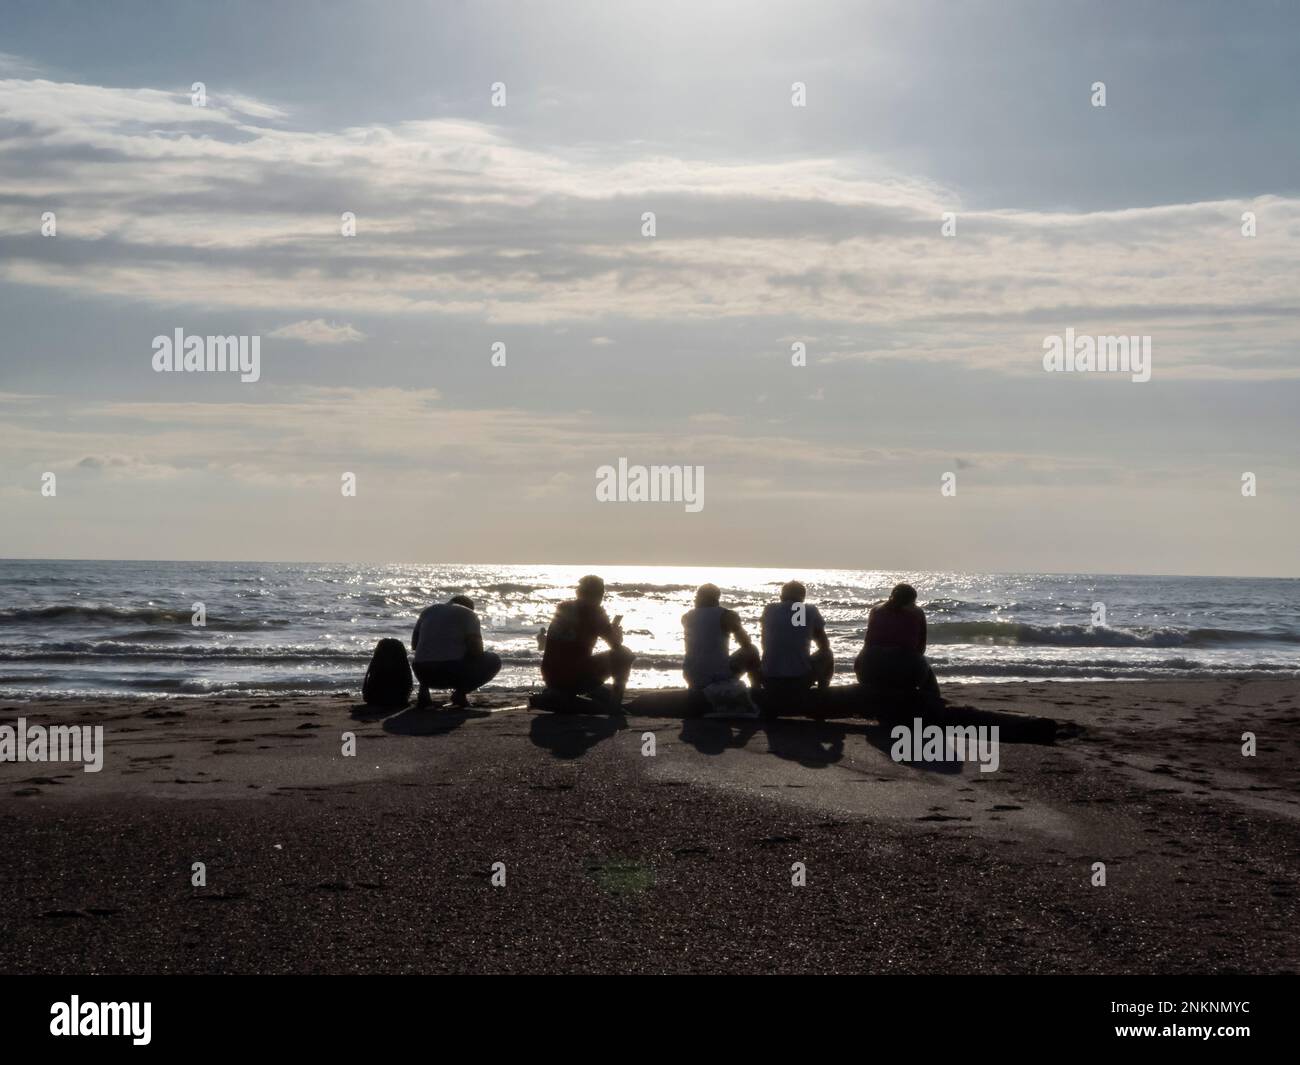 Five people wait for the sun to set before going fishing in Samara Costa Rica Stock Photo